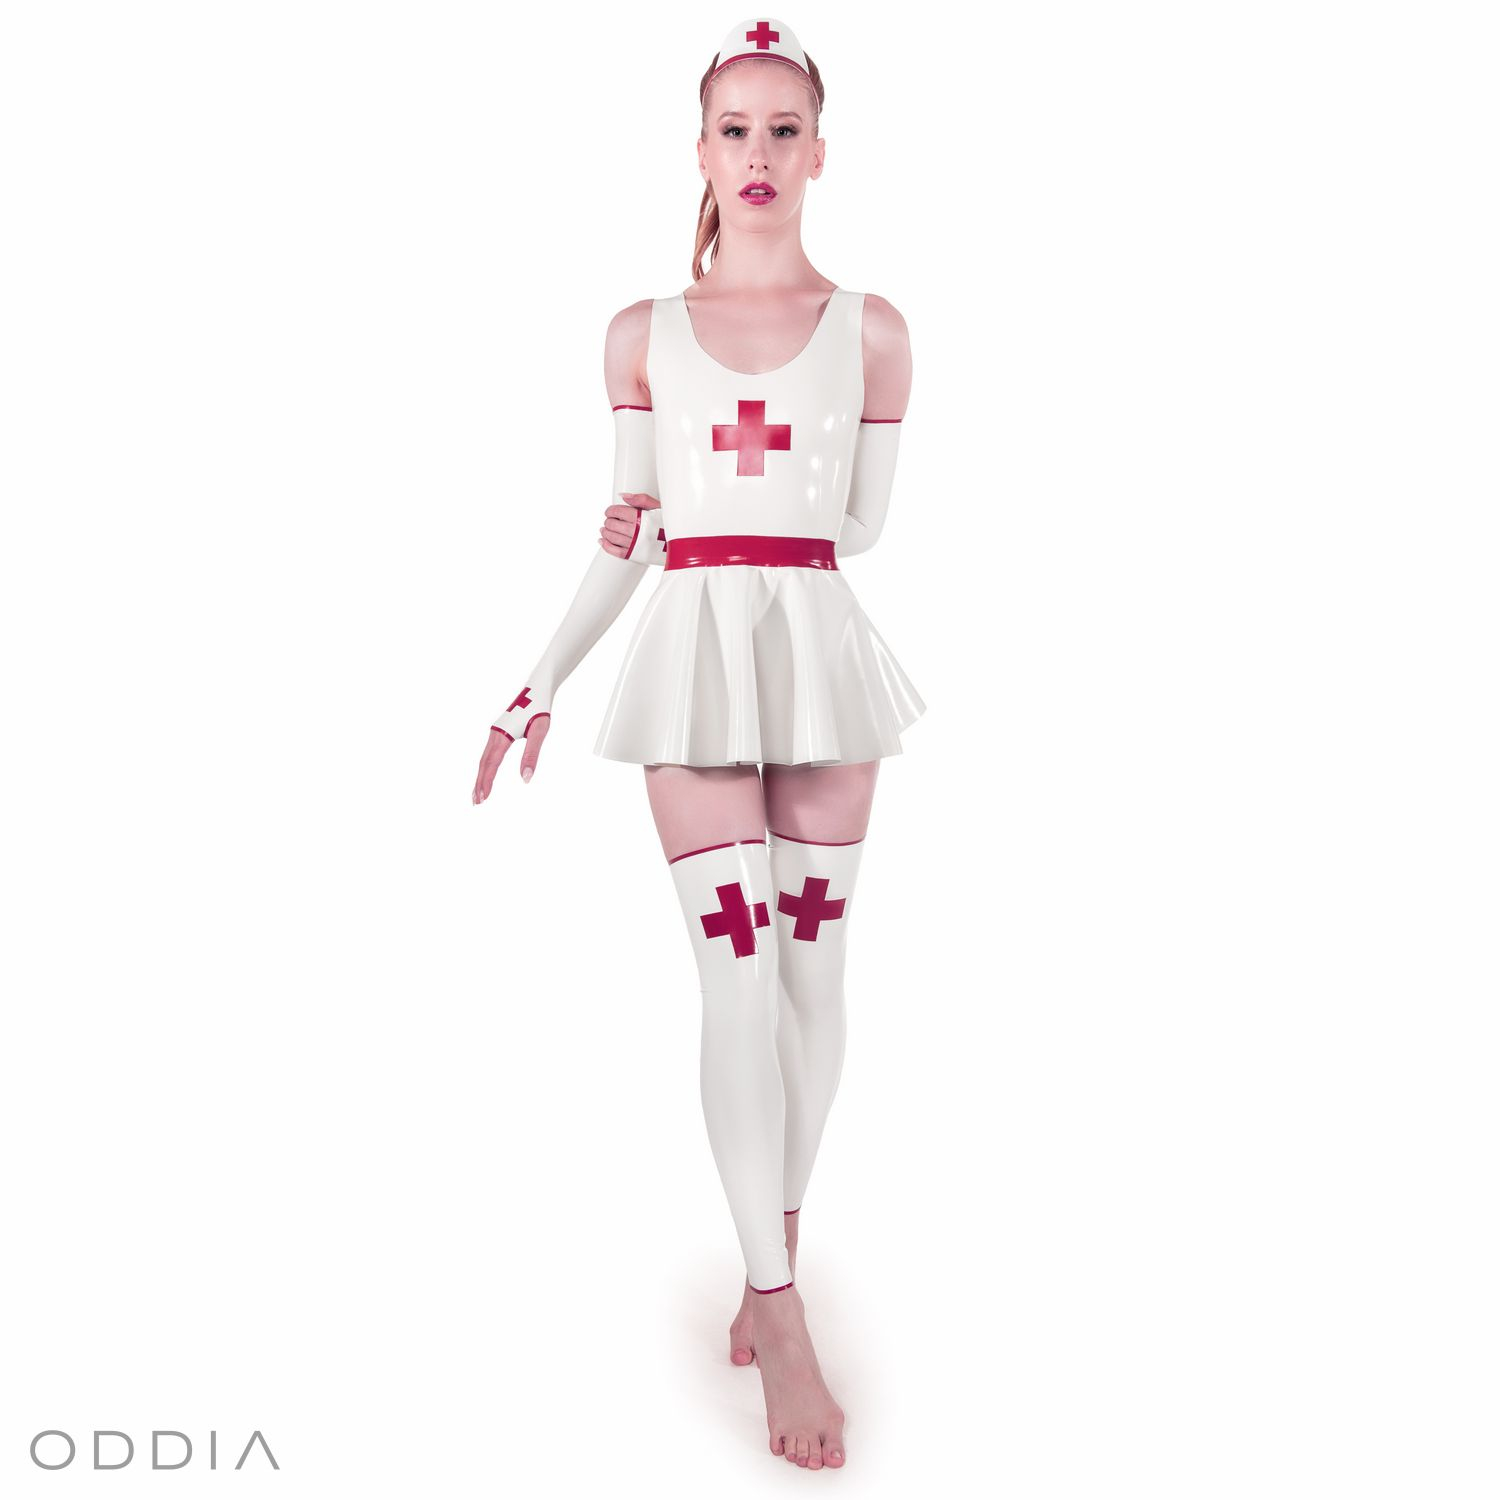 A latex nurse set from white latex with red contrast elements